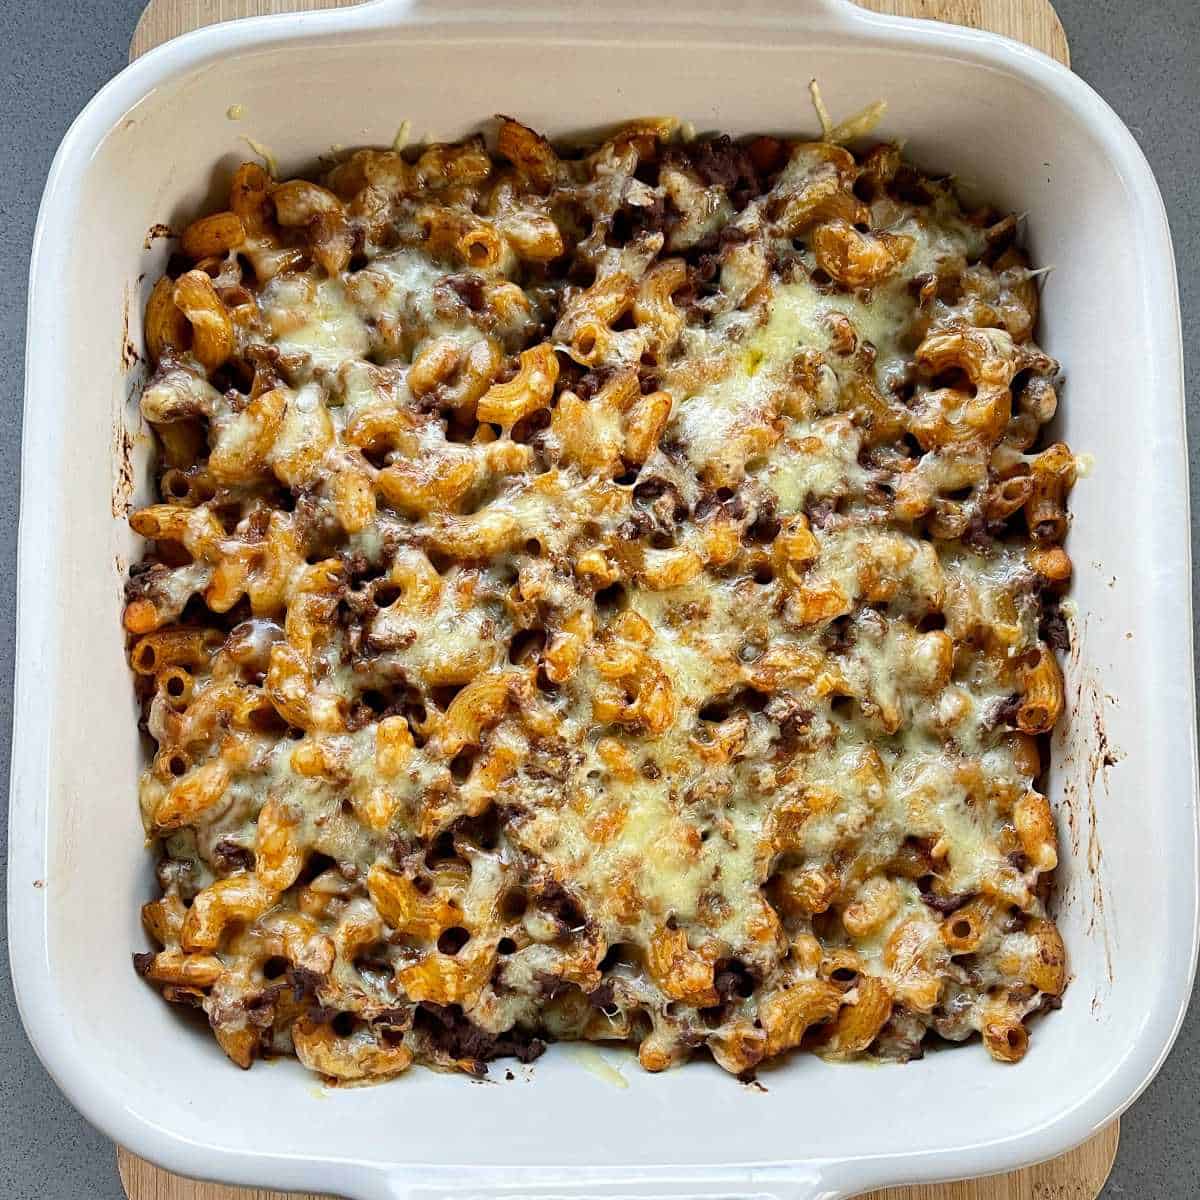 A baked mince, macaroni and bean casserole on a wooden chopping board.